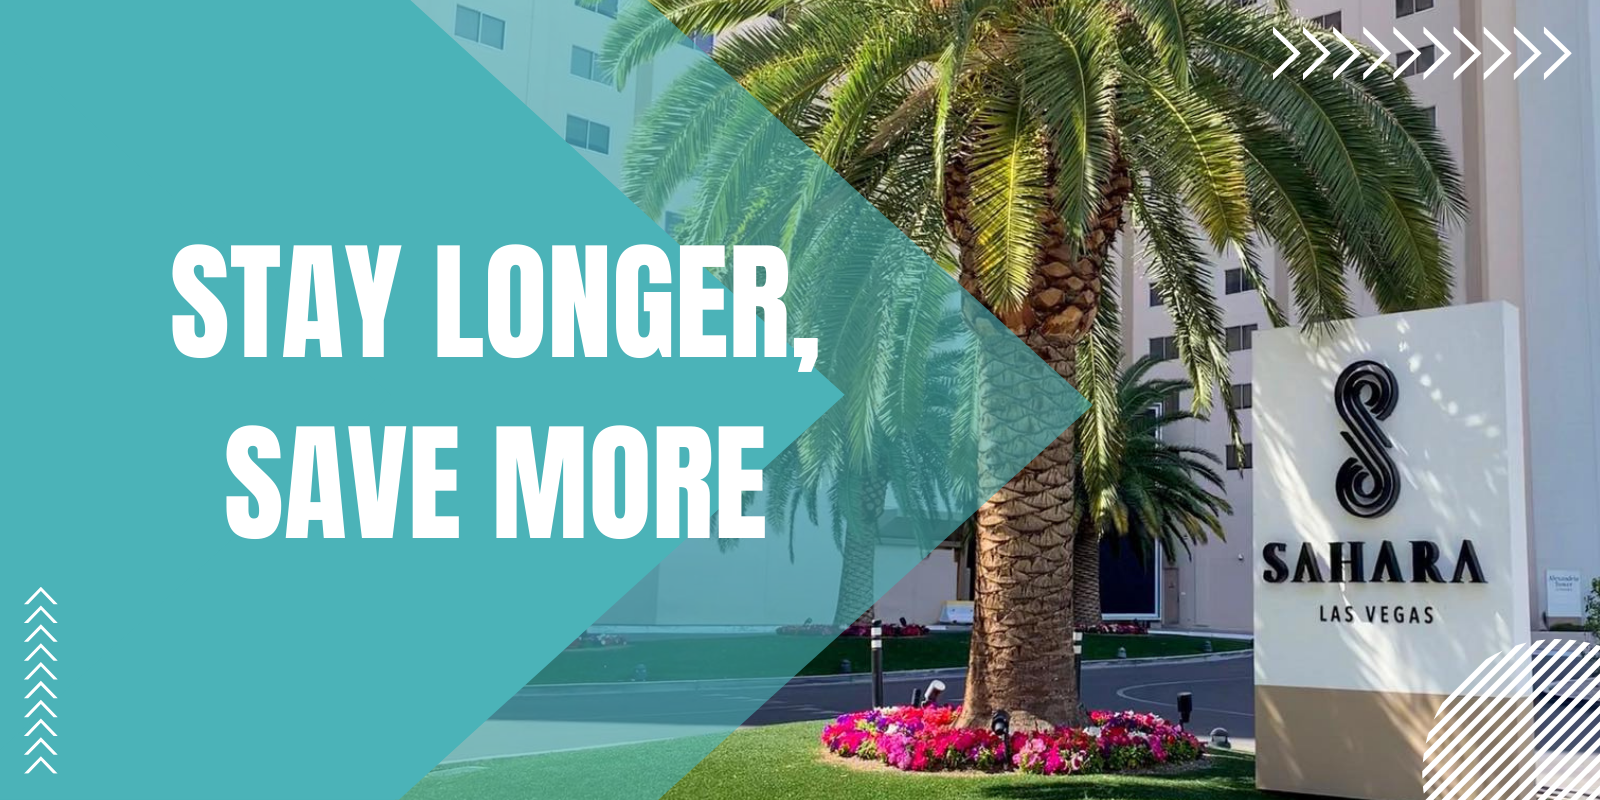 Stay Longer, Save More graphic. Shows SAHARA sign and a palm tree with flowers. Teal and textural treatments.